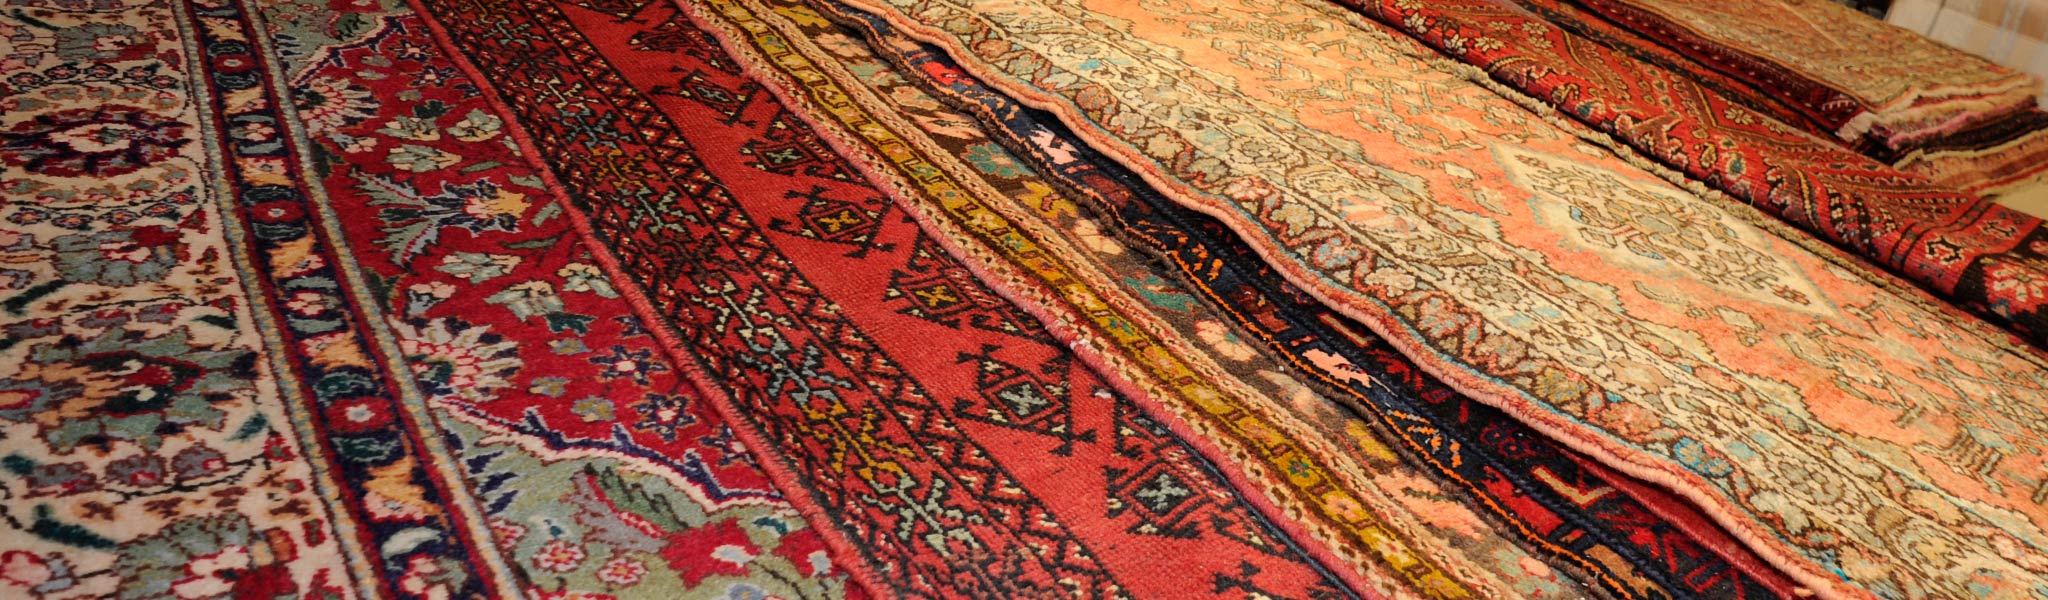 luxury iranian persian rugs for sale